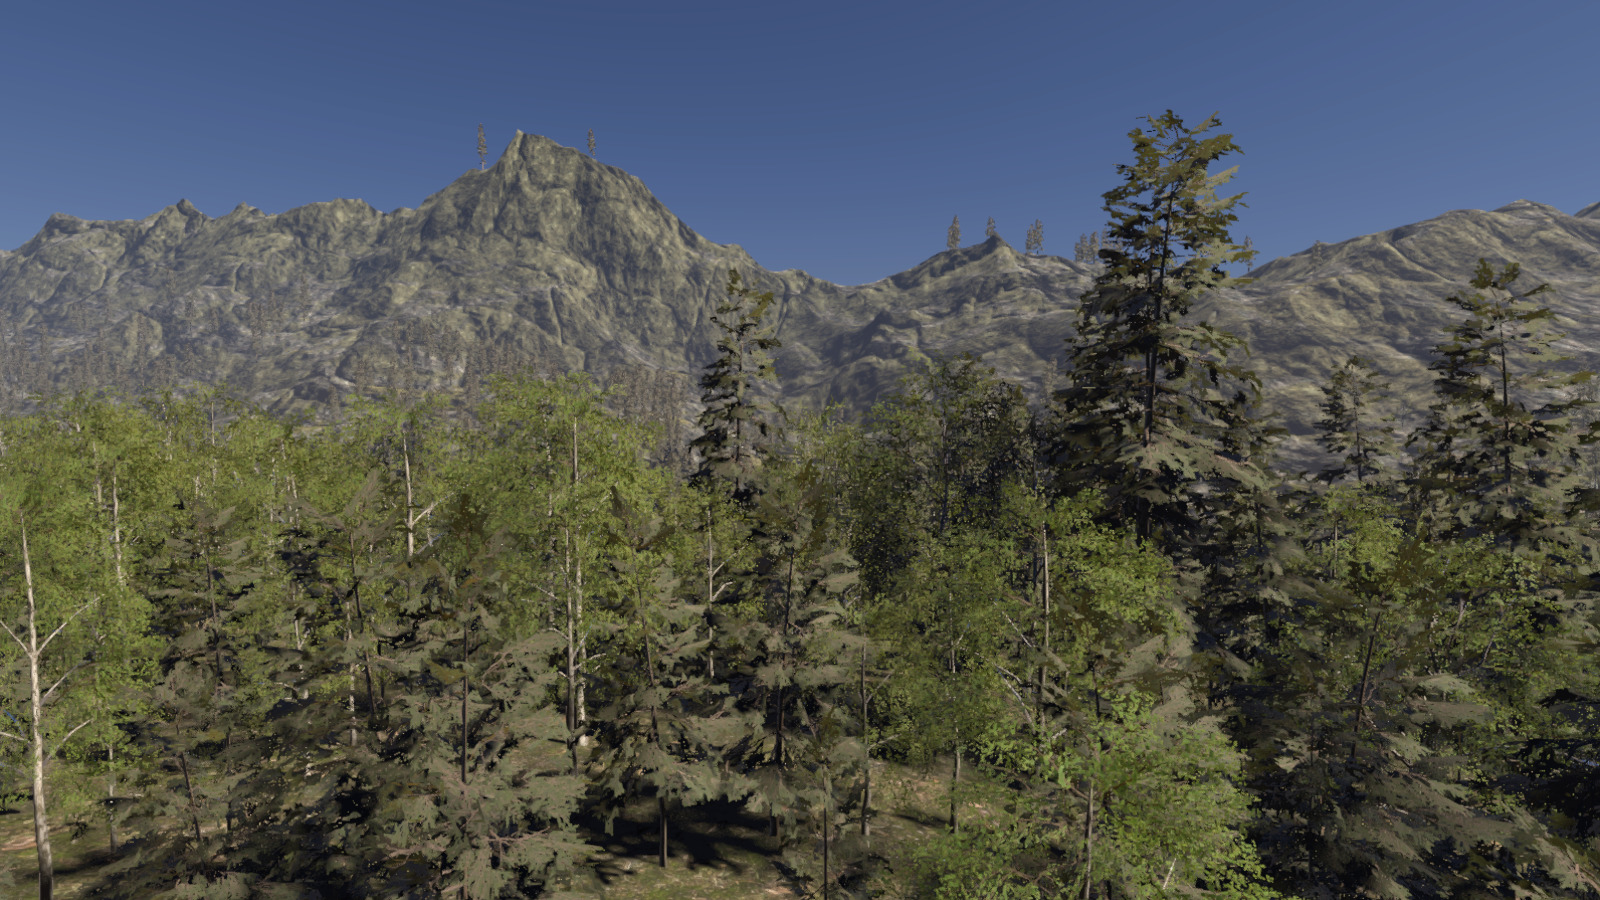 Low aerial view of a coniferous forest area rendered with medium realism